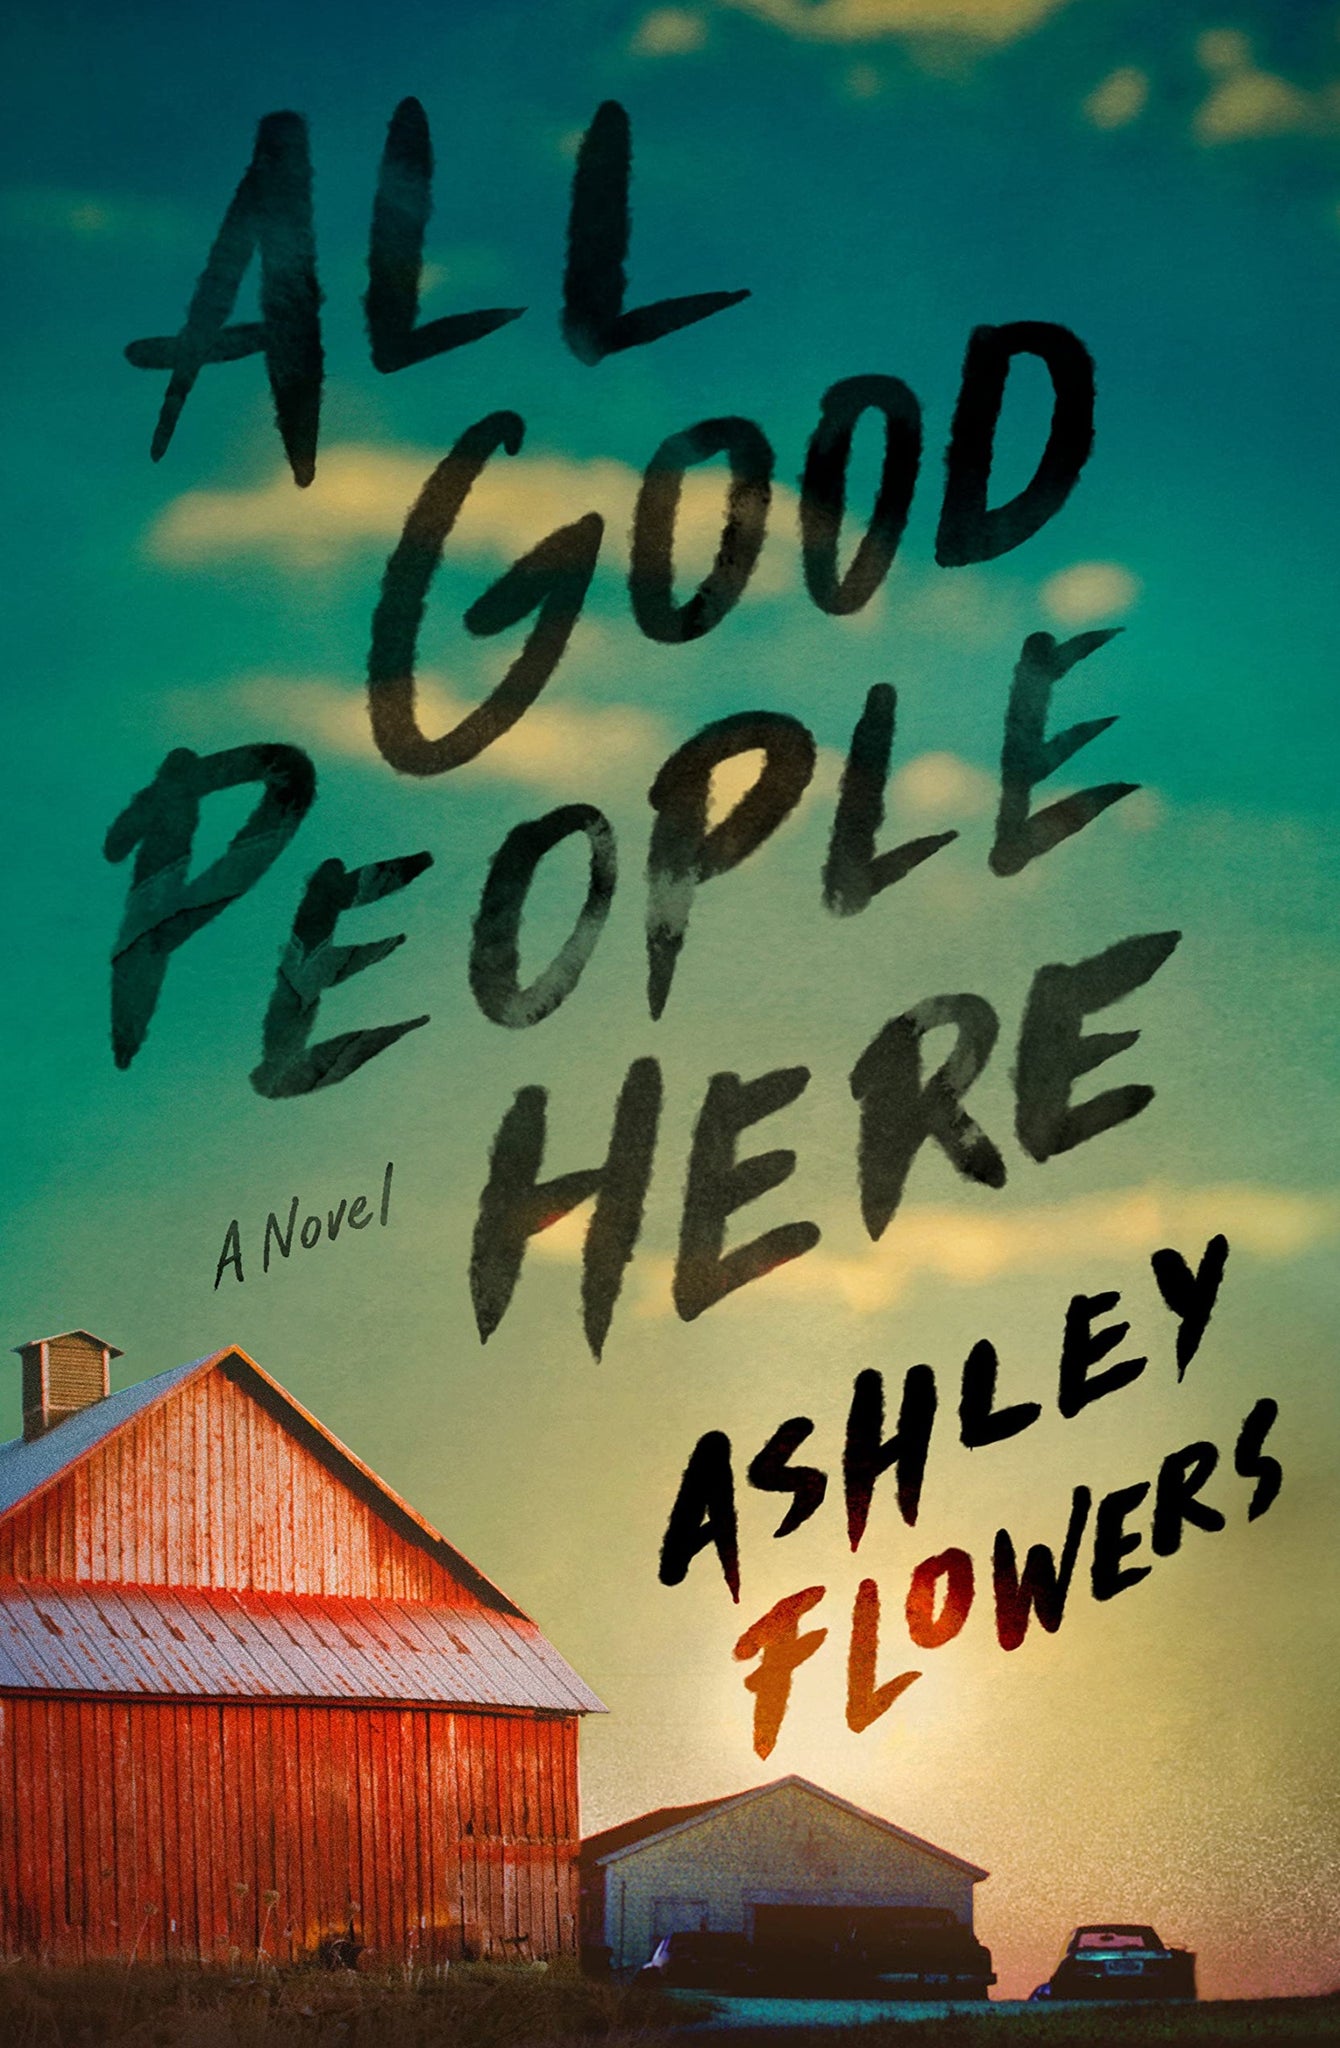 All Good People Here - Ashley Flowers (Hardcover)